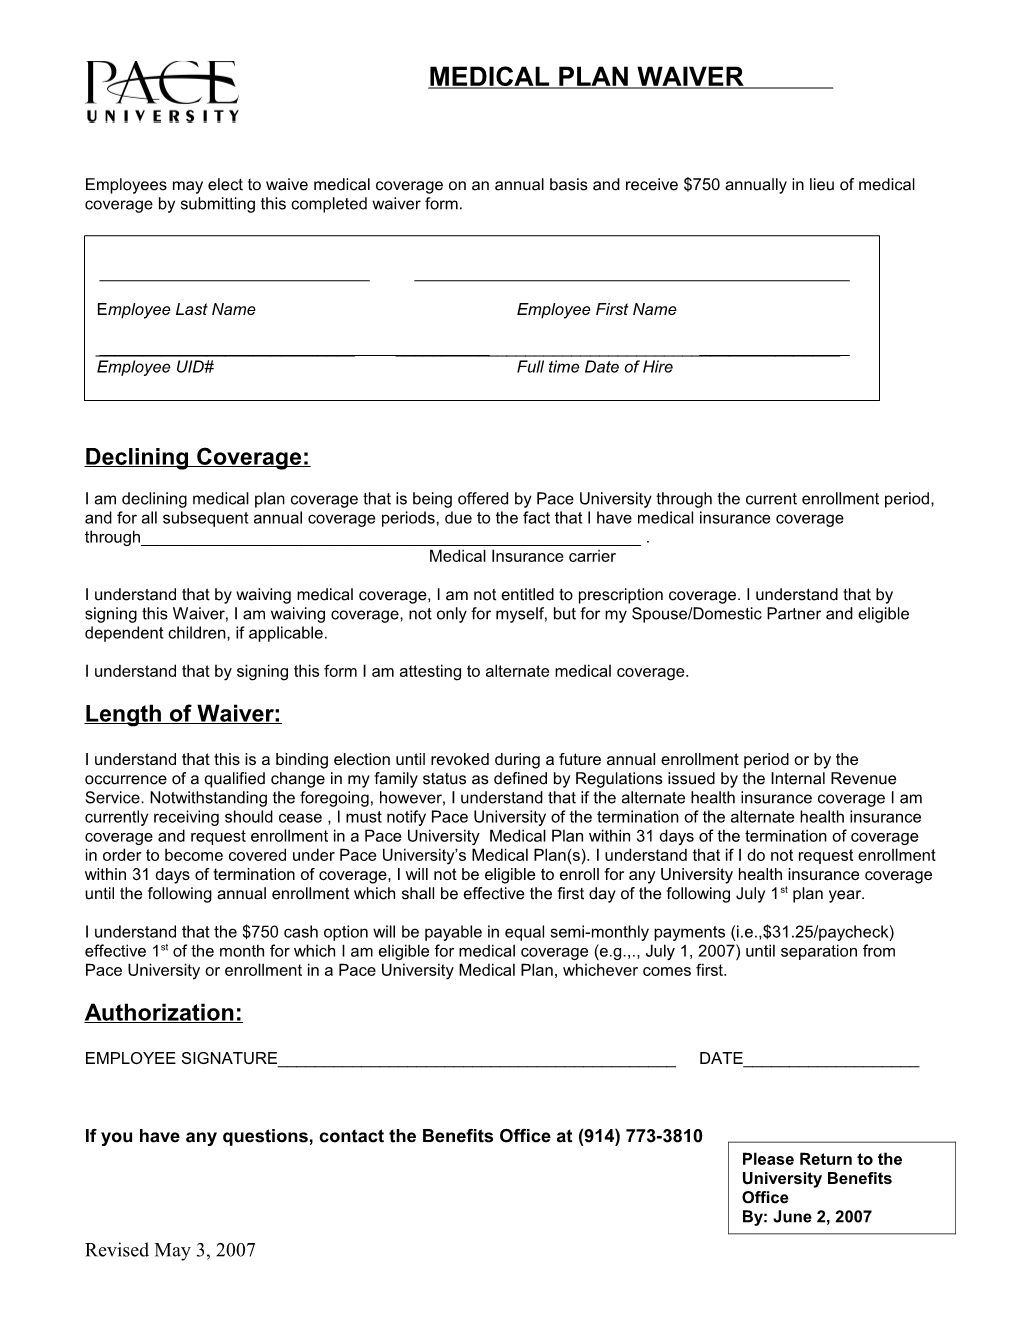 Pace University Health Insurance Waiver